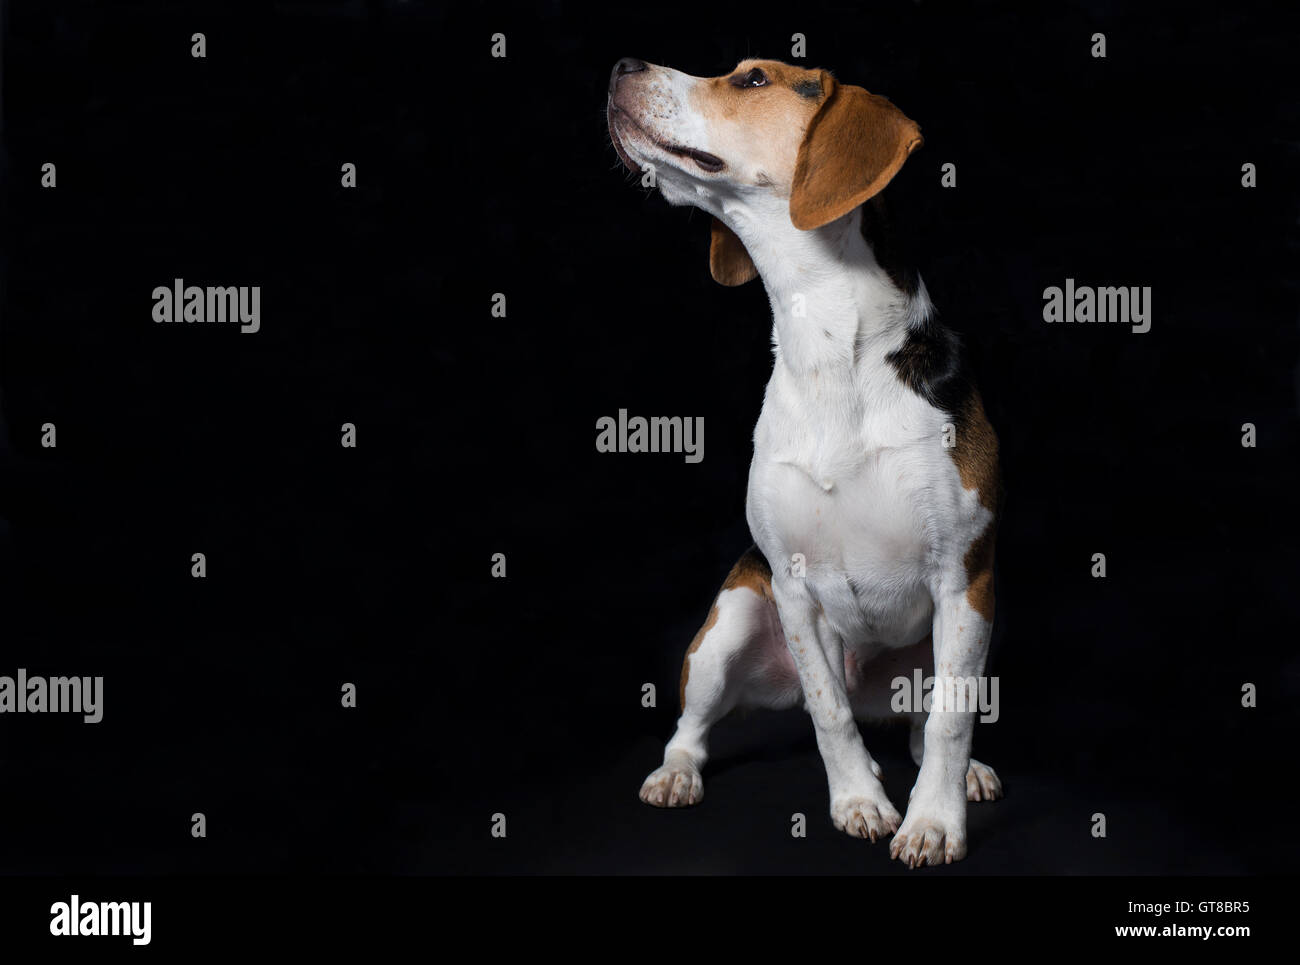 Portrait of a Beagle puppy standing proud, looking upwards Stock Photo